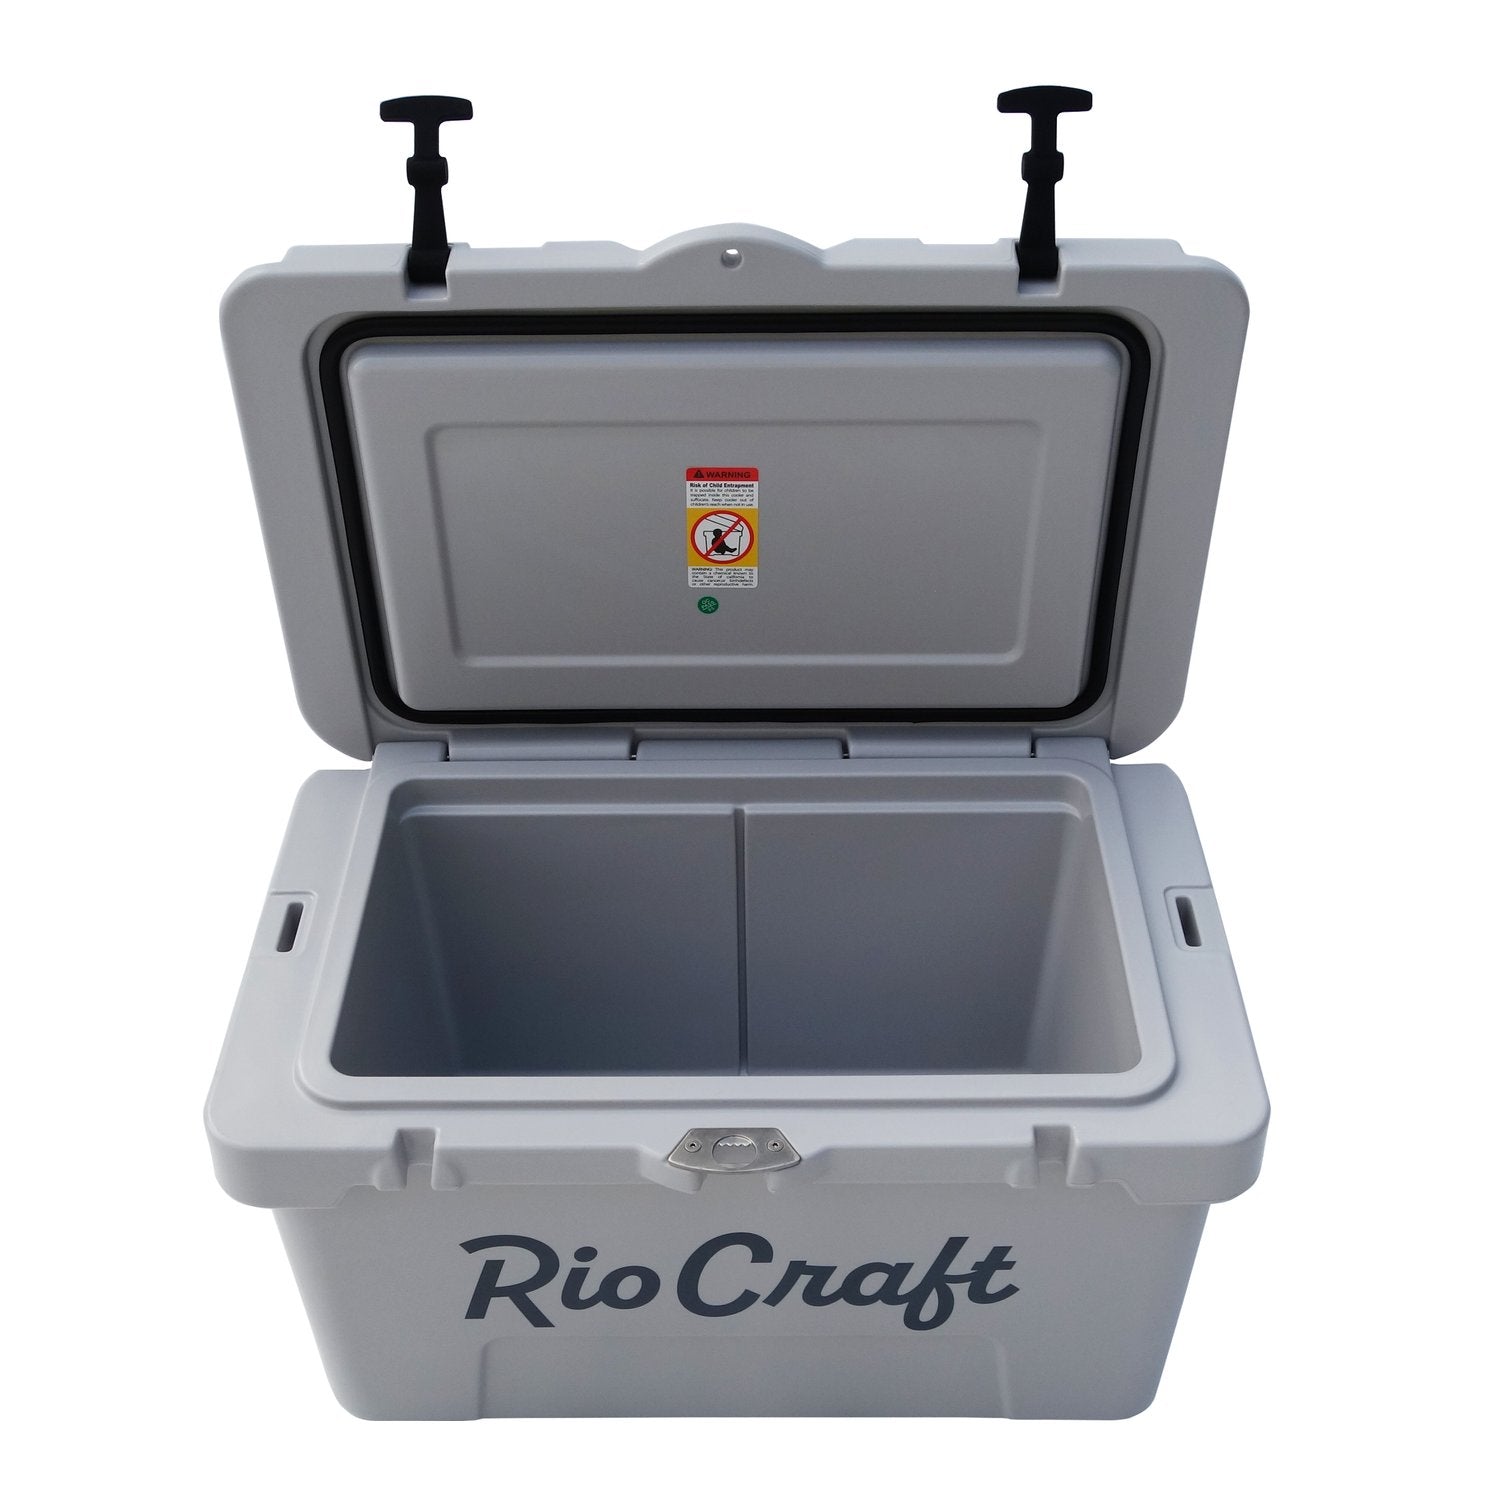 A durable gray Rio Coolers for river missions with the word Rio Craft prominently displayed.